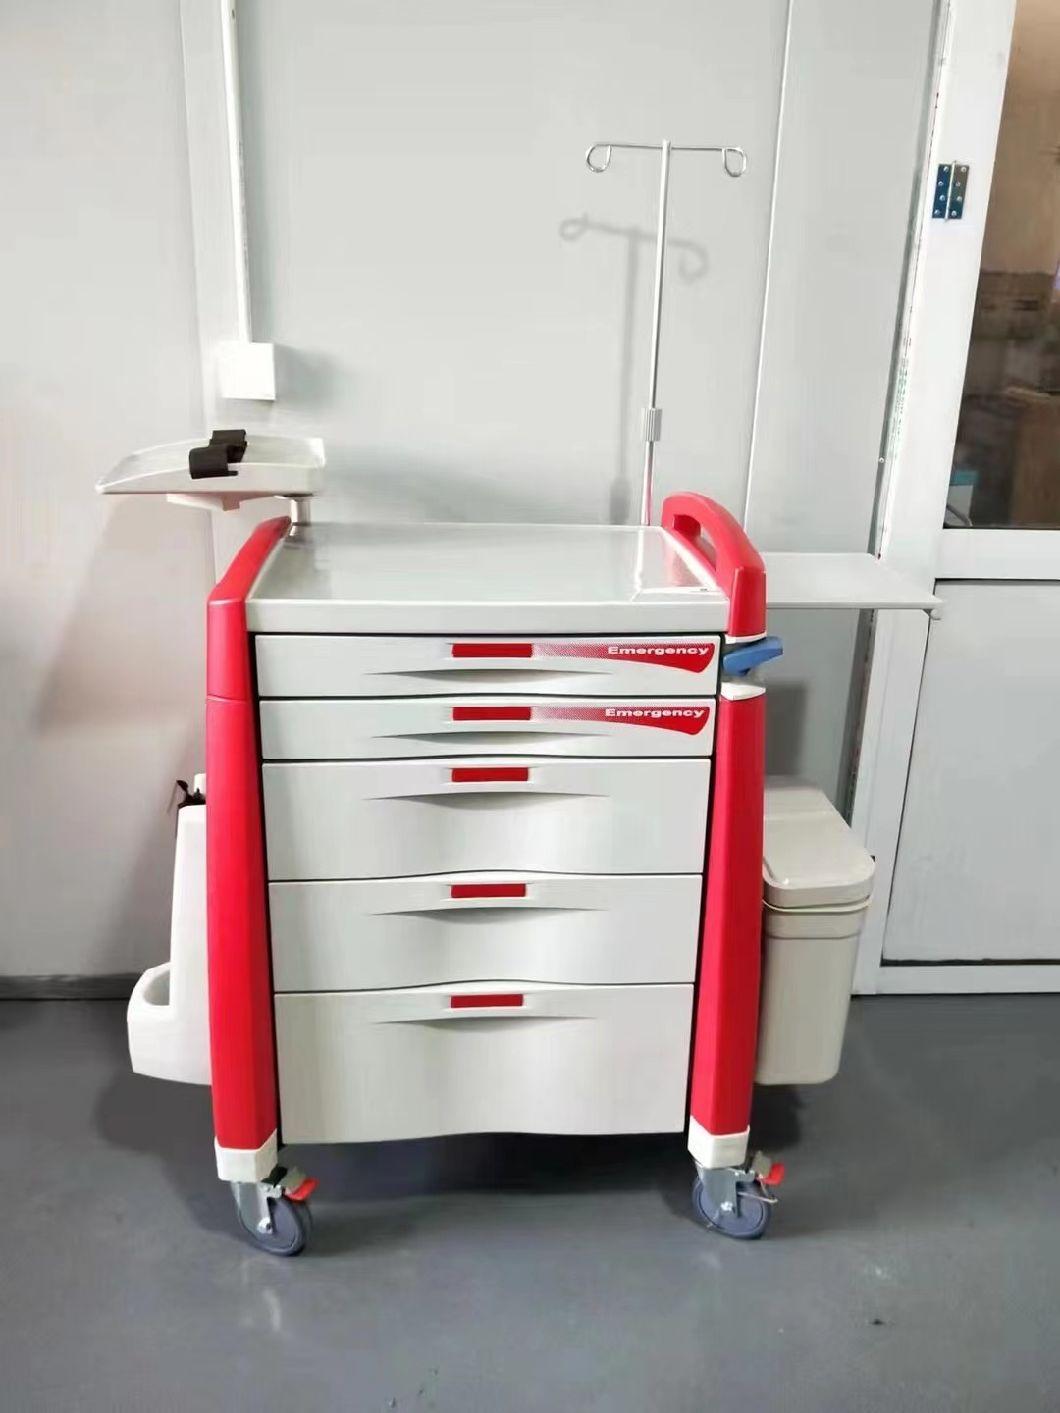 Hospital Furniture Medical Emergency Stainless Steel Instrument Dressing Treatment Nursing Crash Trolley Cart with Layers and Drawers/ABS Material Also Optional